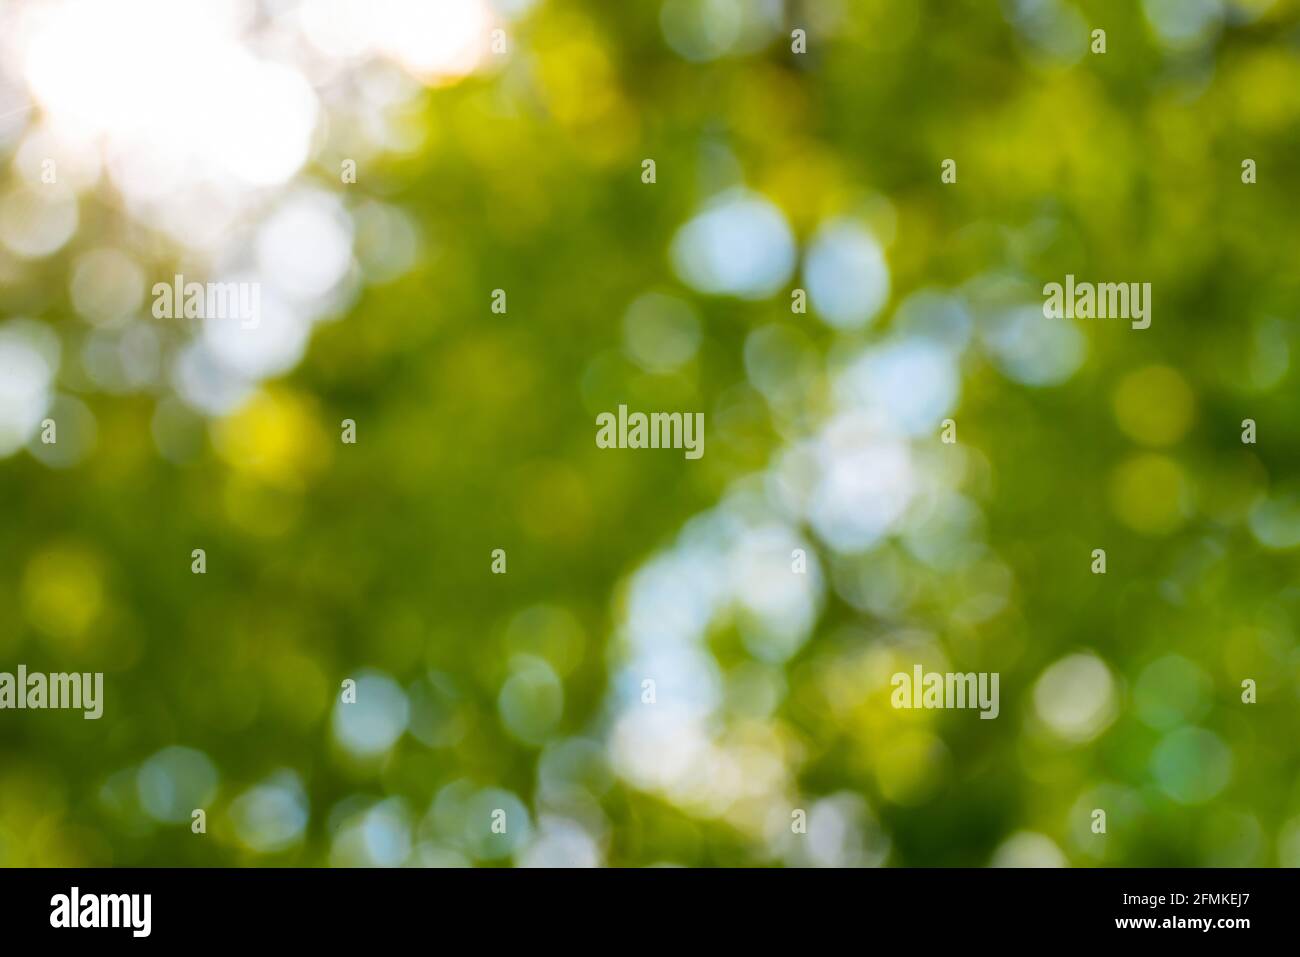 abstract blurred nature background, defocused lush green foliage against blue sky and golden sunlight Stock Photo